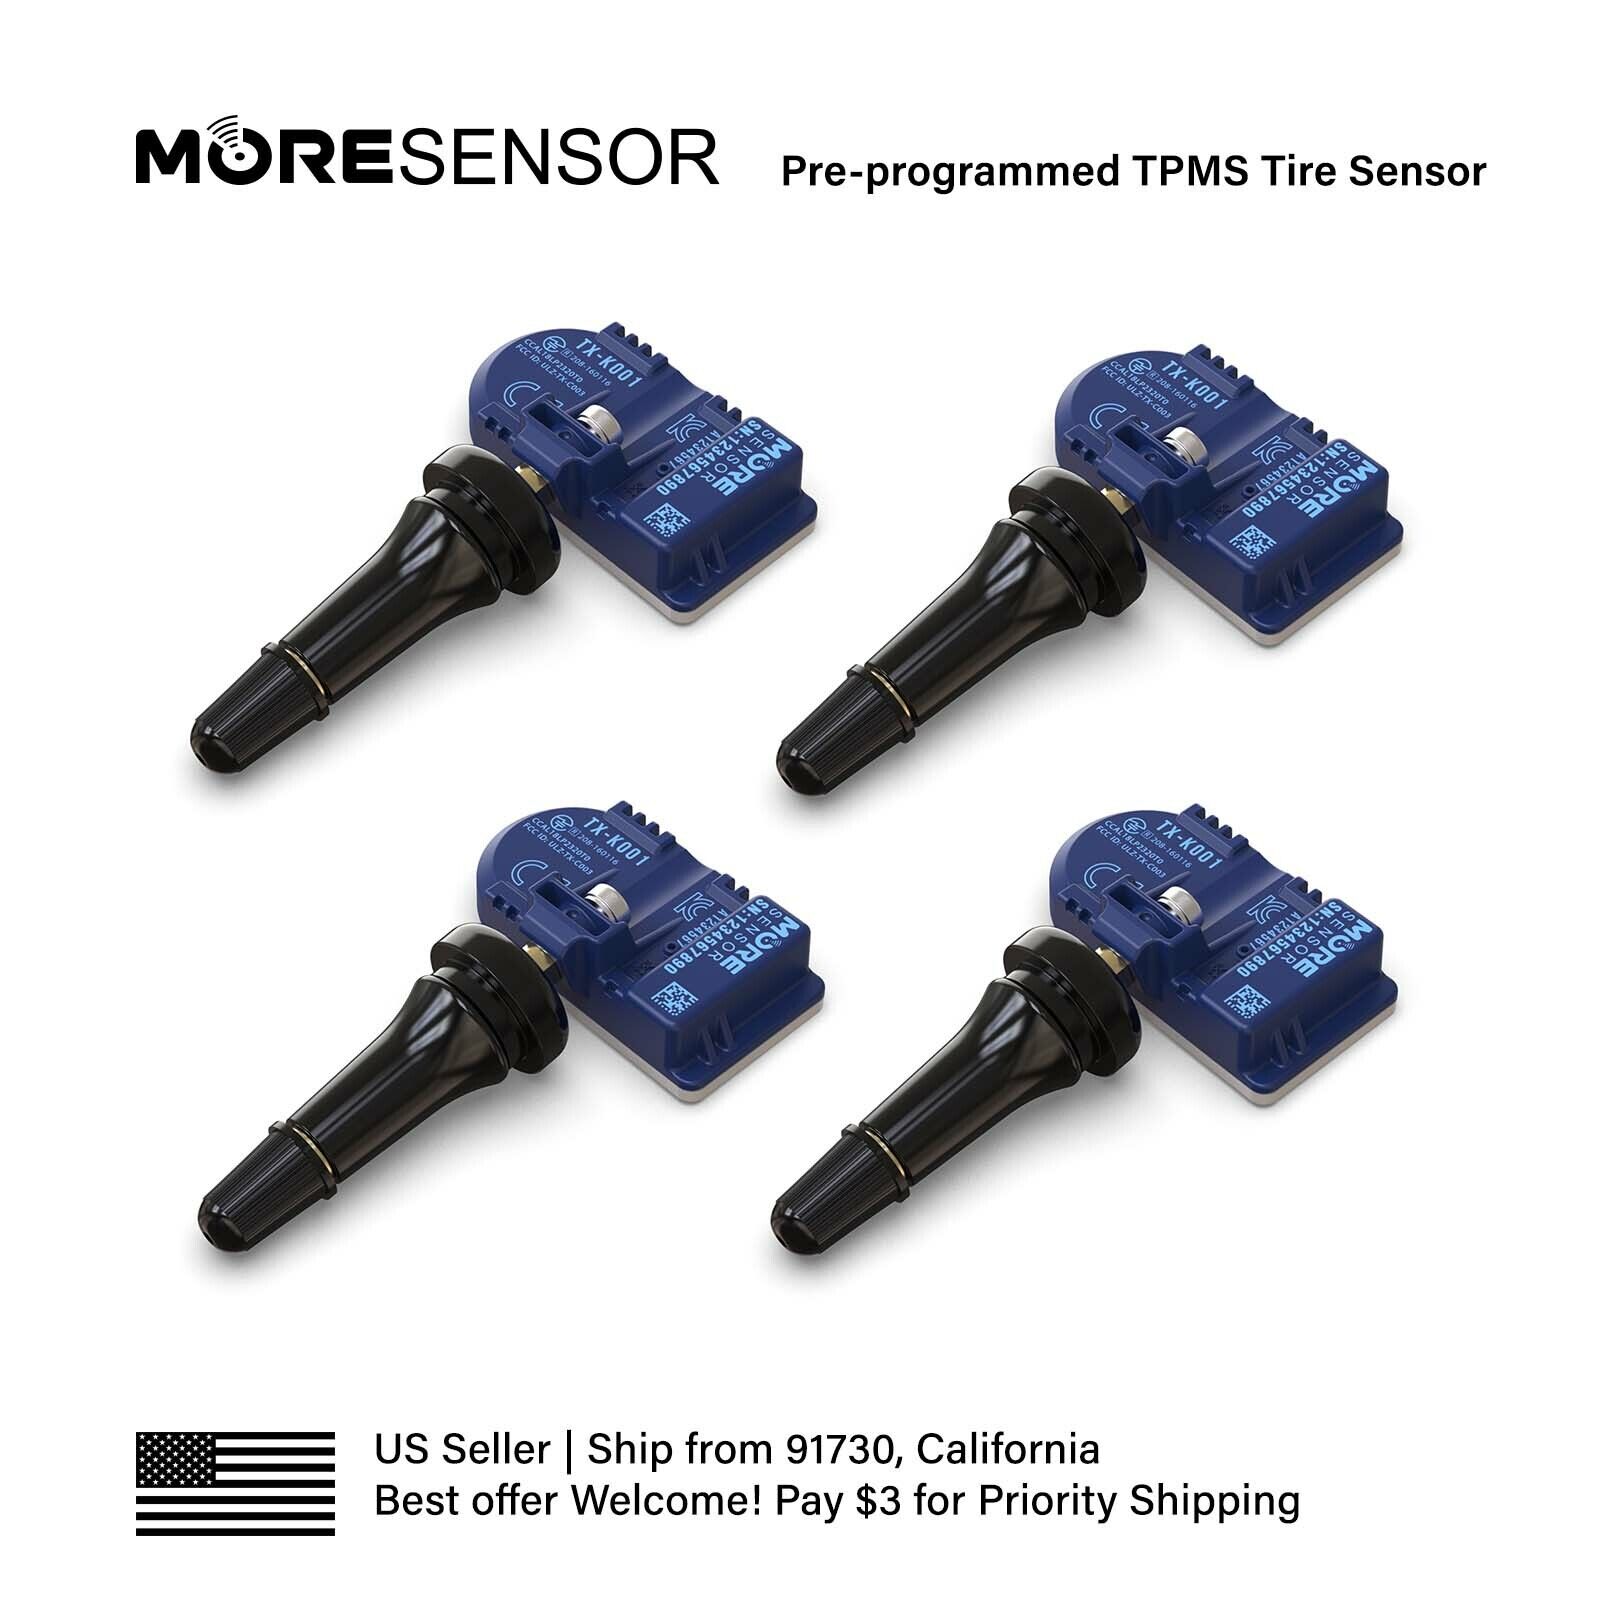 4PC 433MHz MORESENSOR TPMS Snap-in Tire Sensor for 911 Boxster Cayman Cayenne